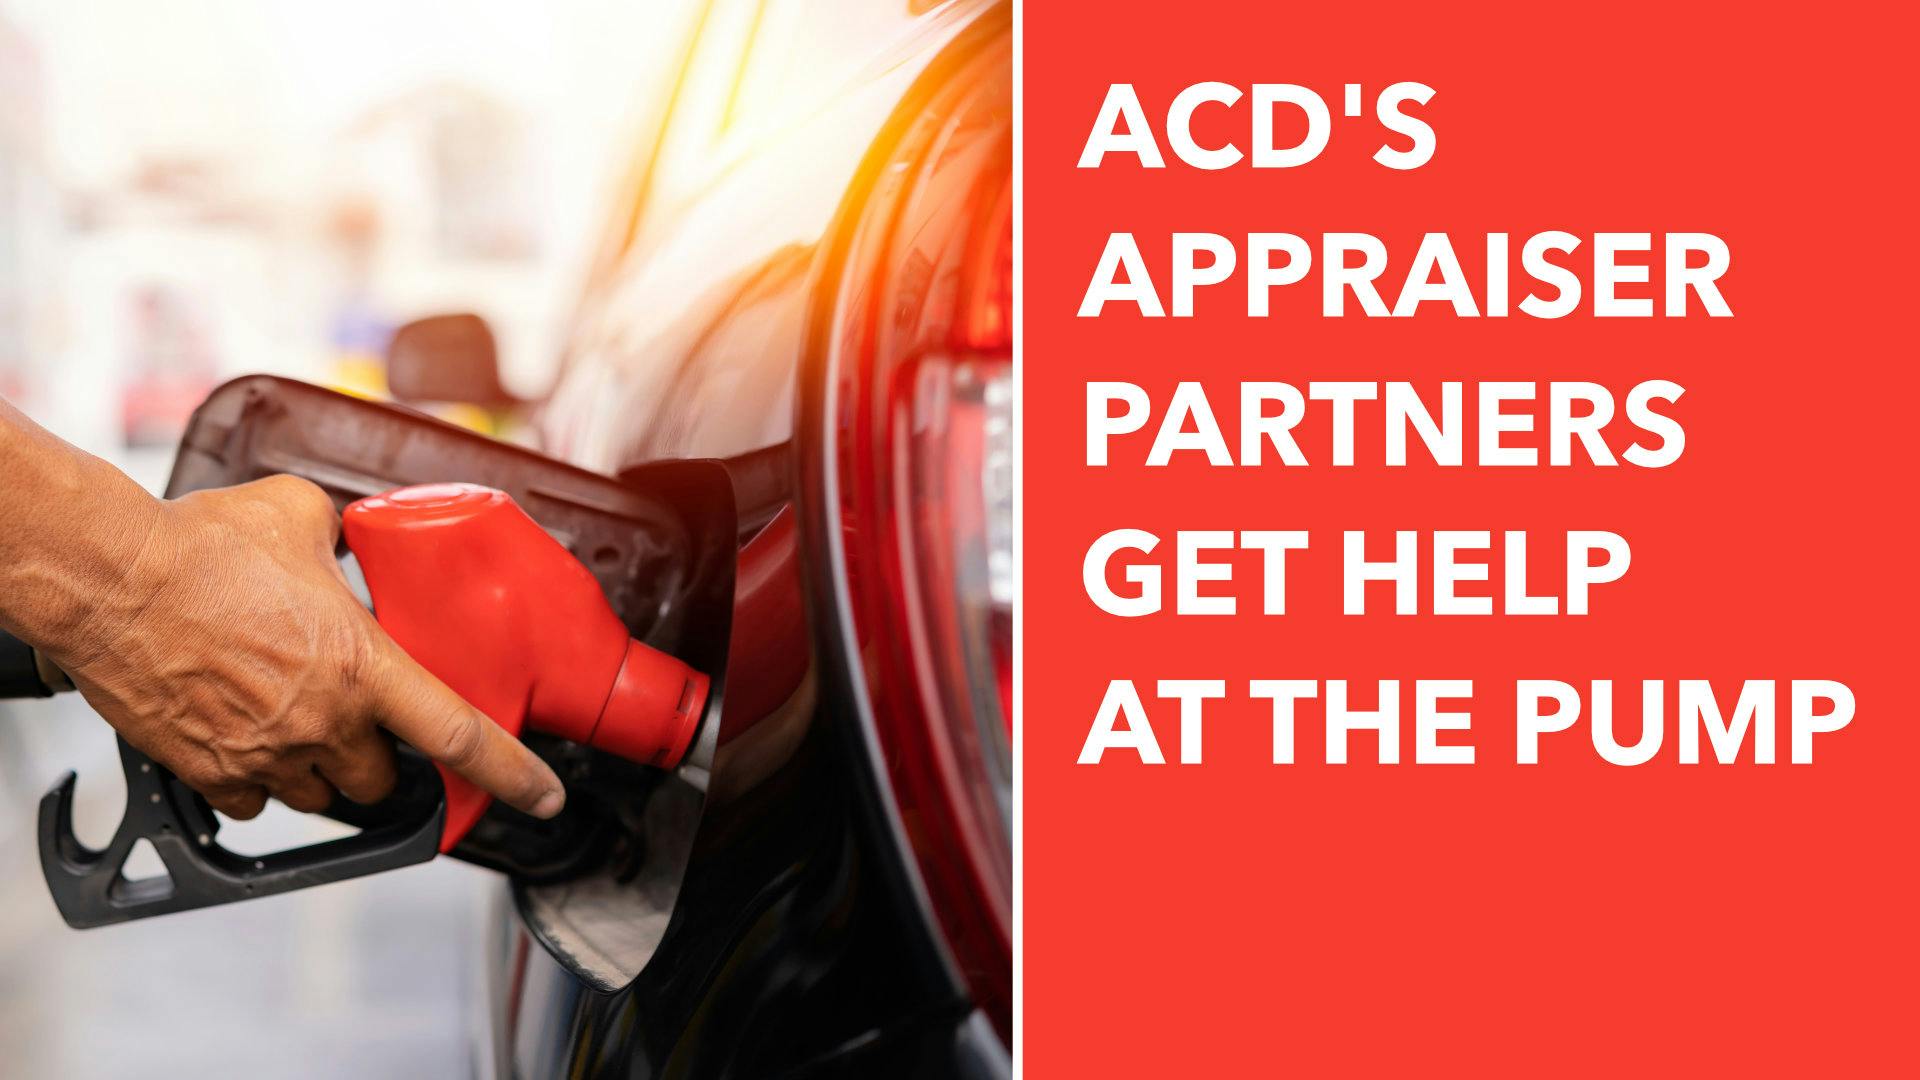 ACD Takes Steps to Help Appraiser Partners Battle Increasing Fuel Costs